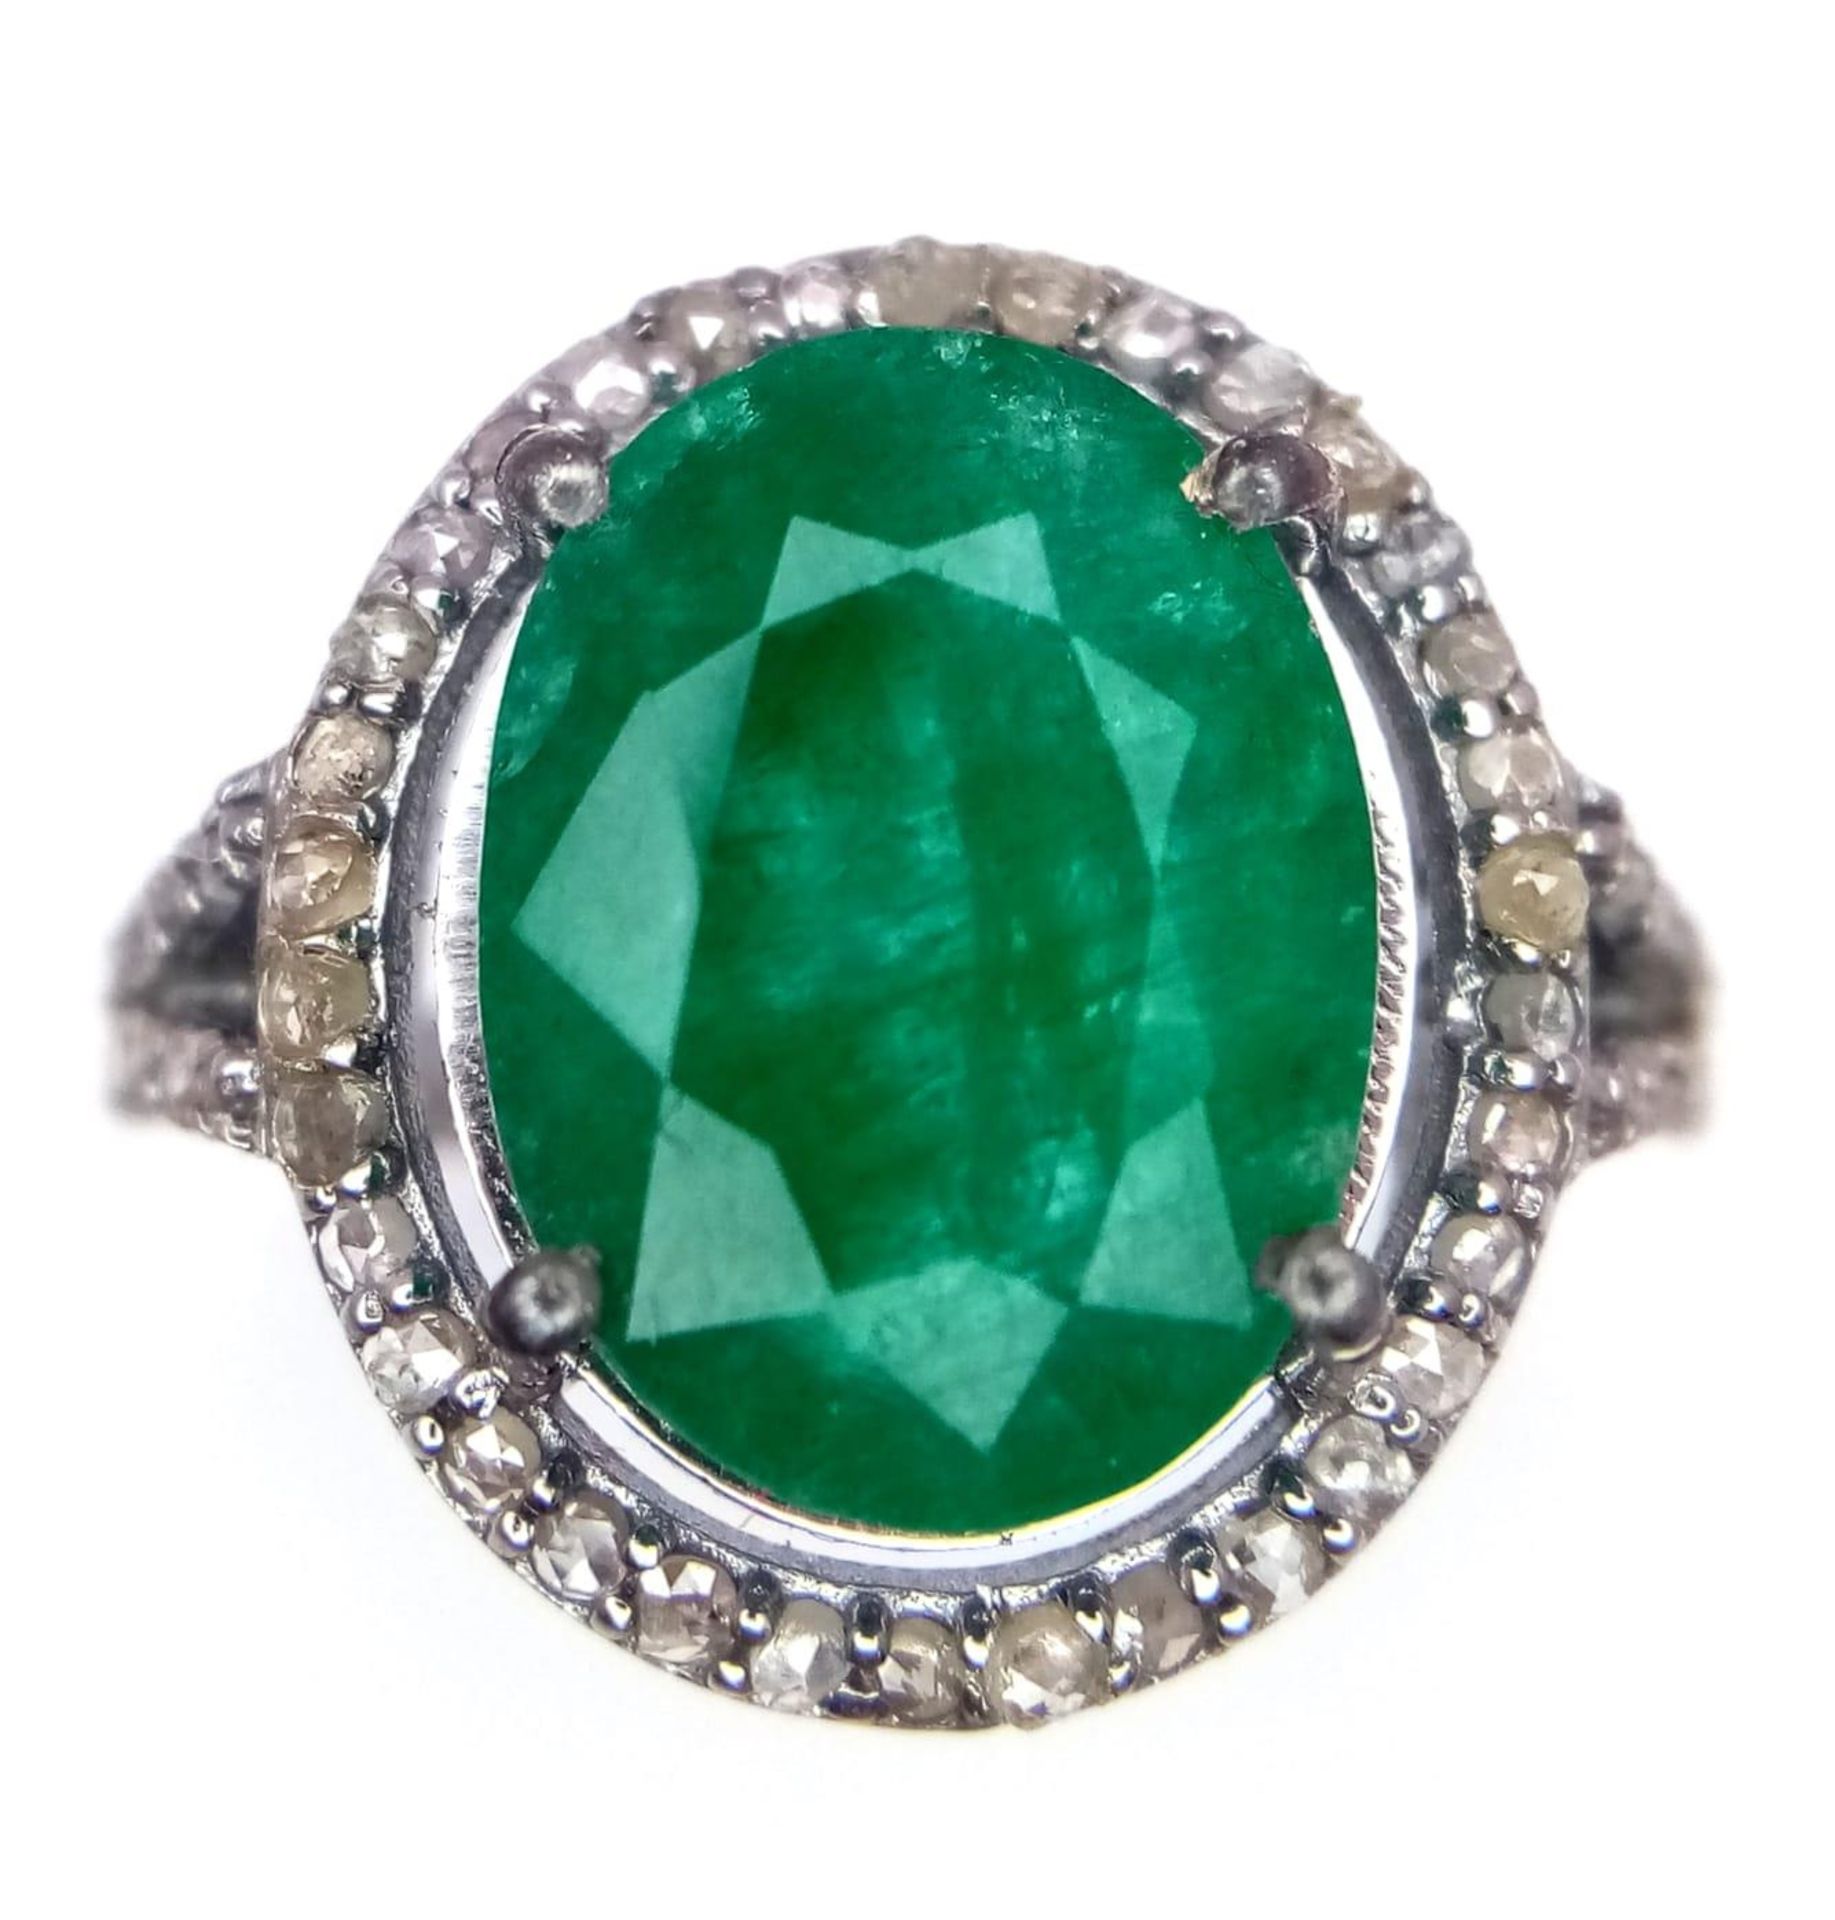 An Emerald Ring with a Halo of Diamonds on 925 Silver. 7.55ct emerald, 0.67ctw diamonds. Size N, 4.